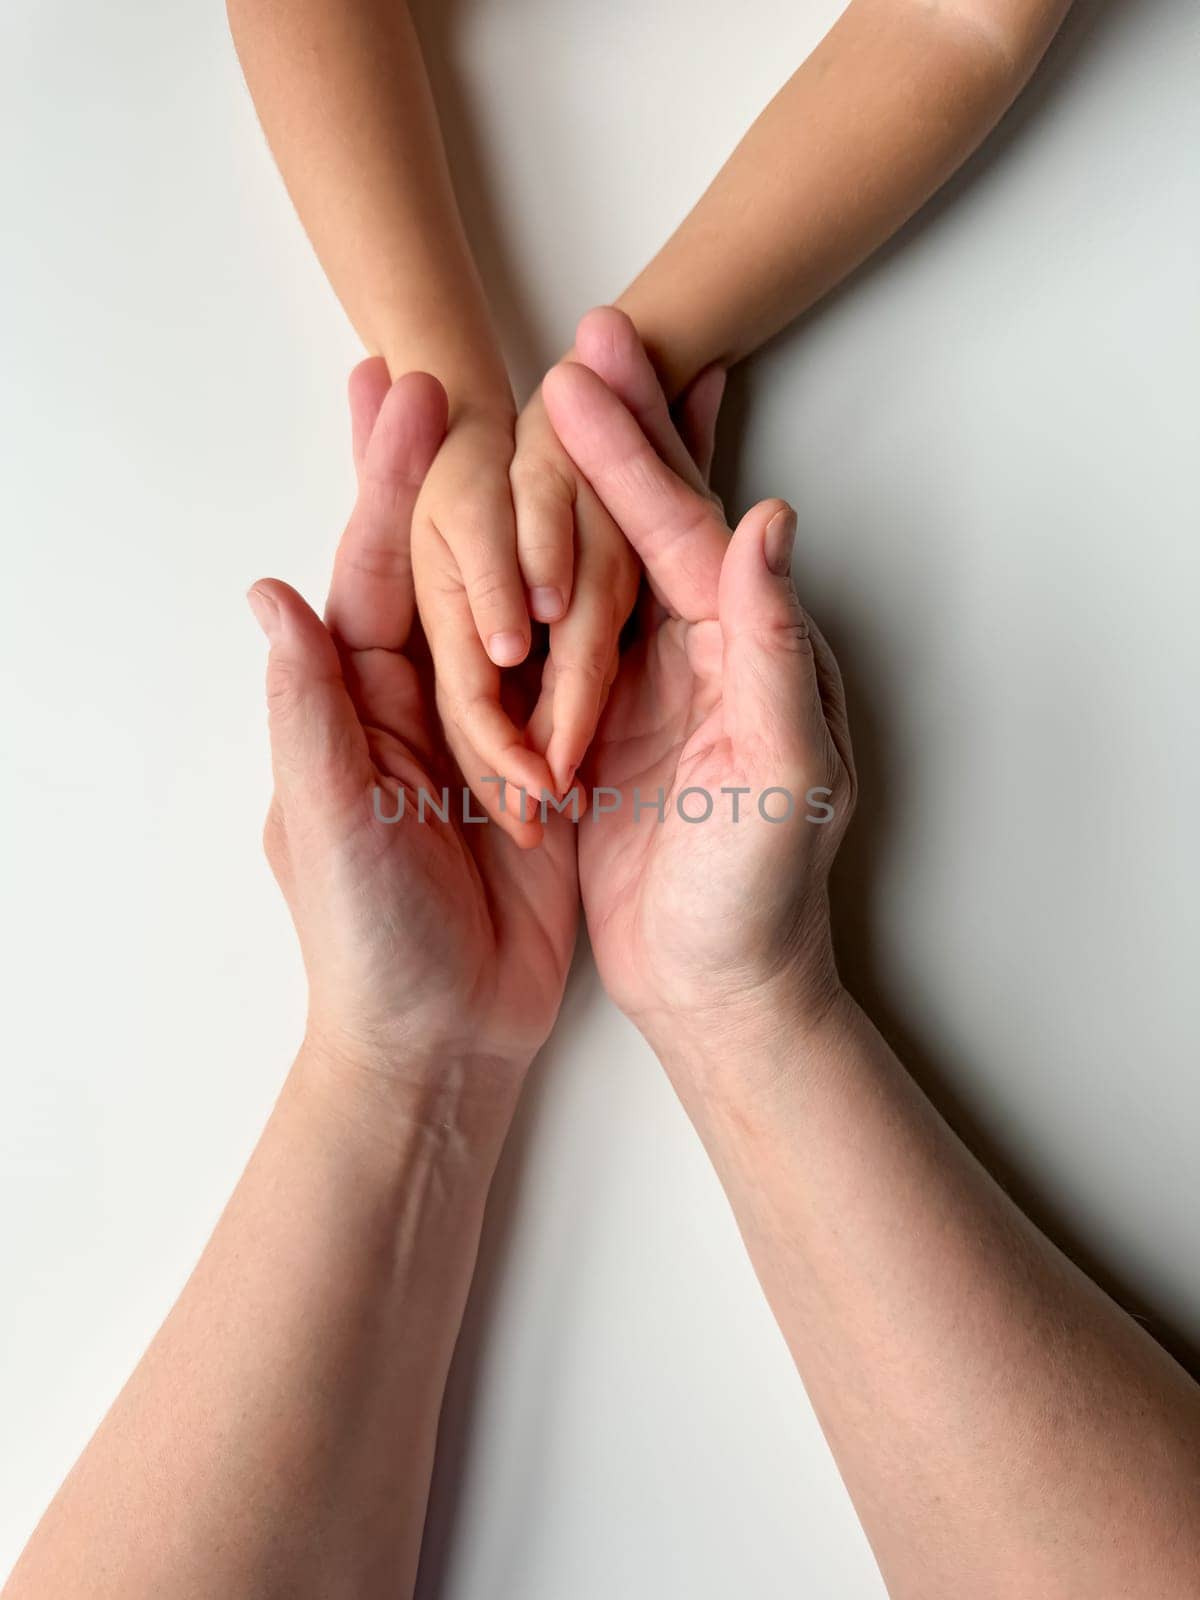 Mothers hands holding childs hands on a white background. High quality photo